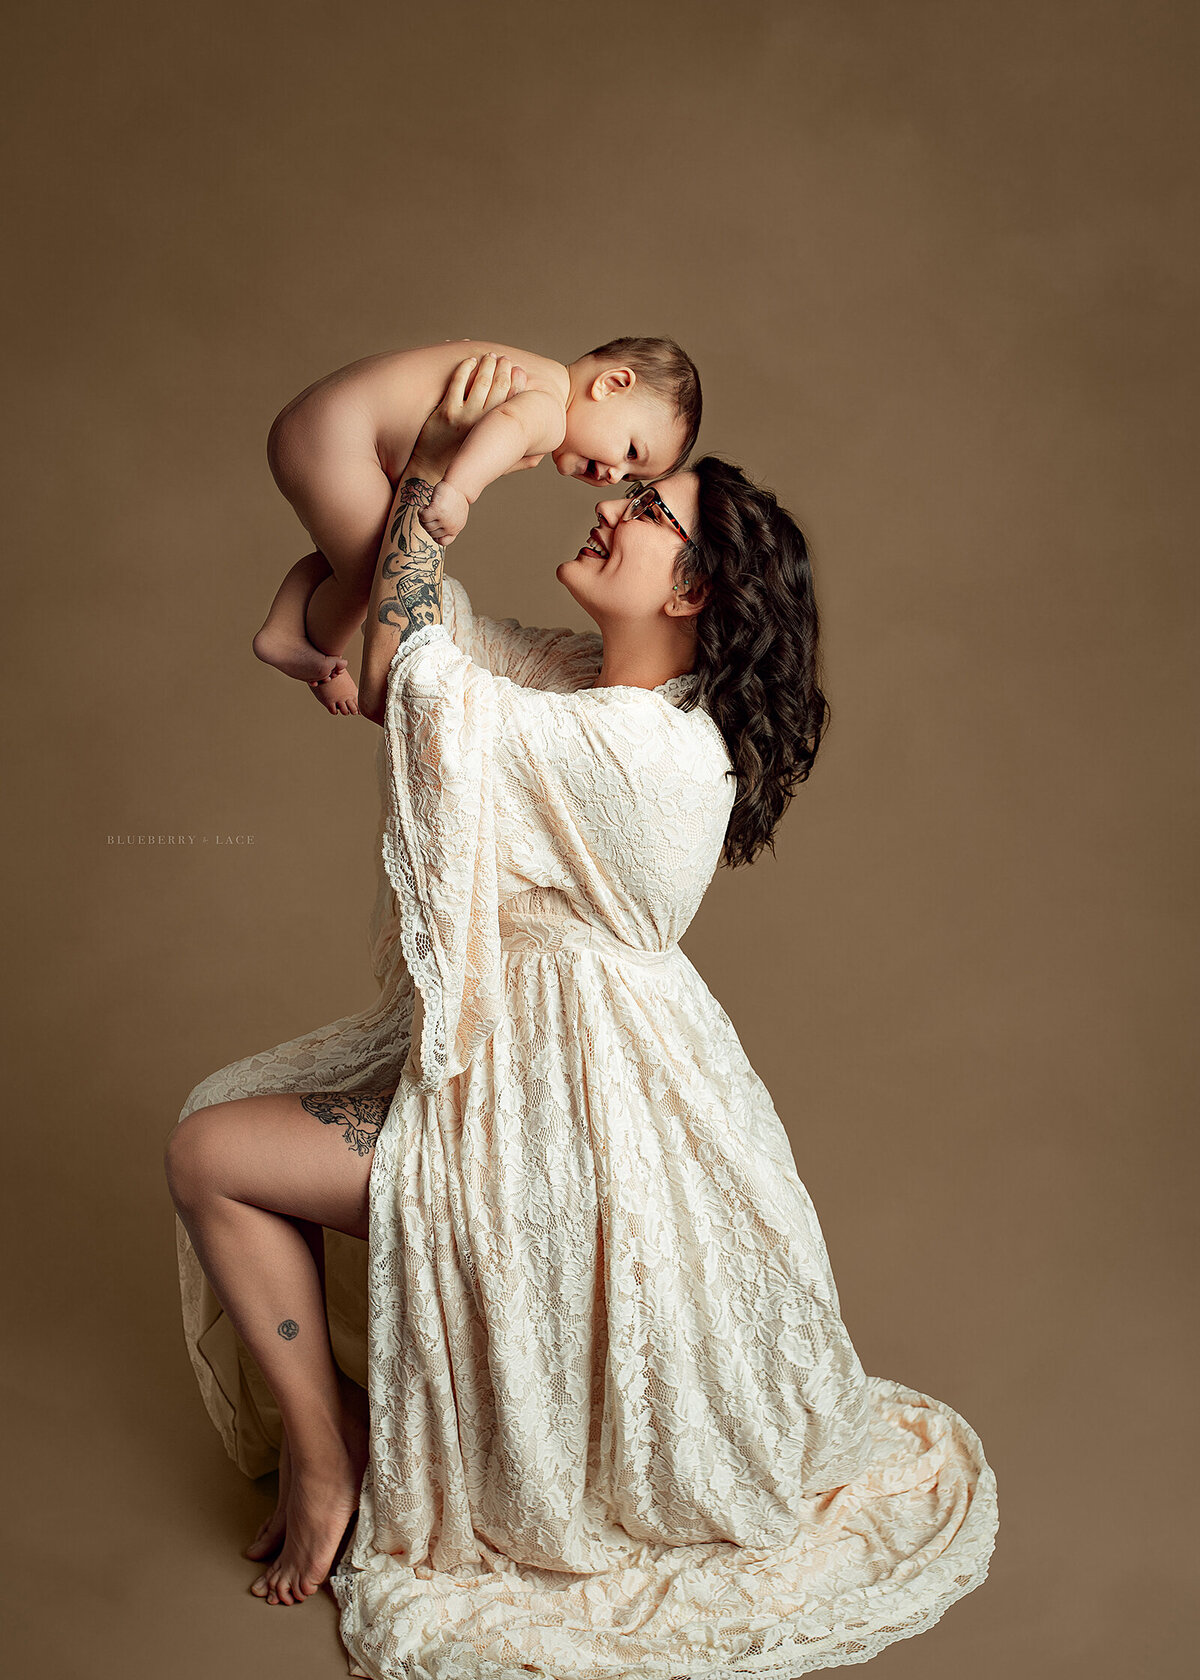 mommy and me in studio syracuse ny photographer photoshoot neutral mom with baby